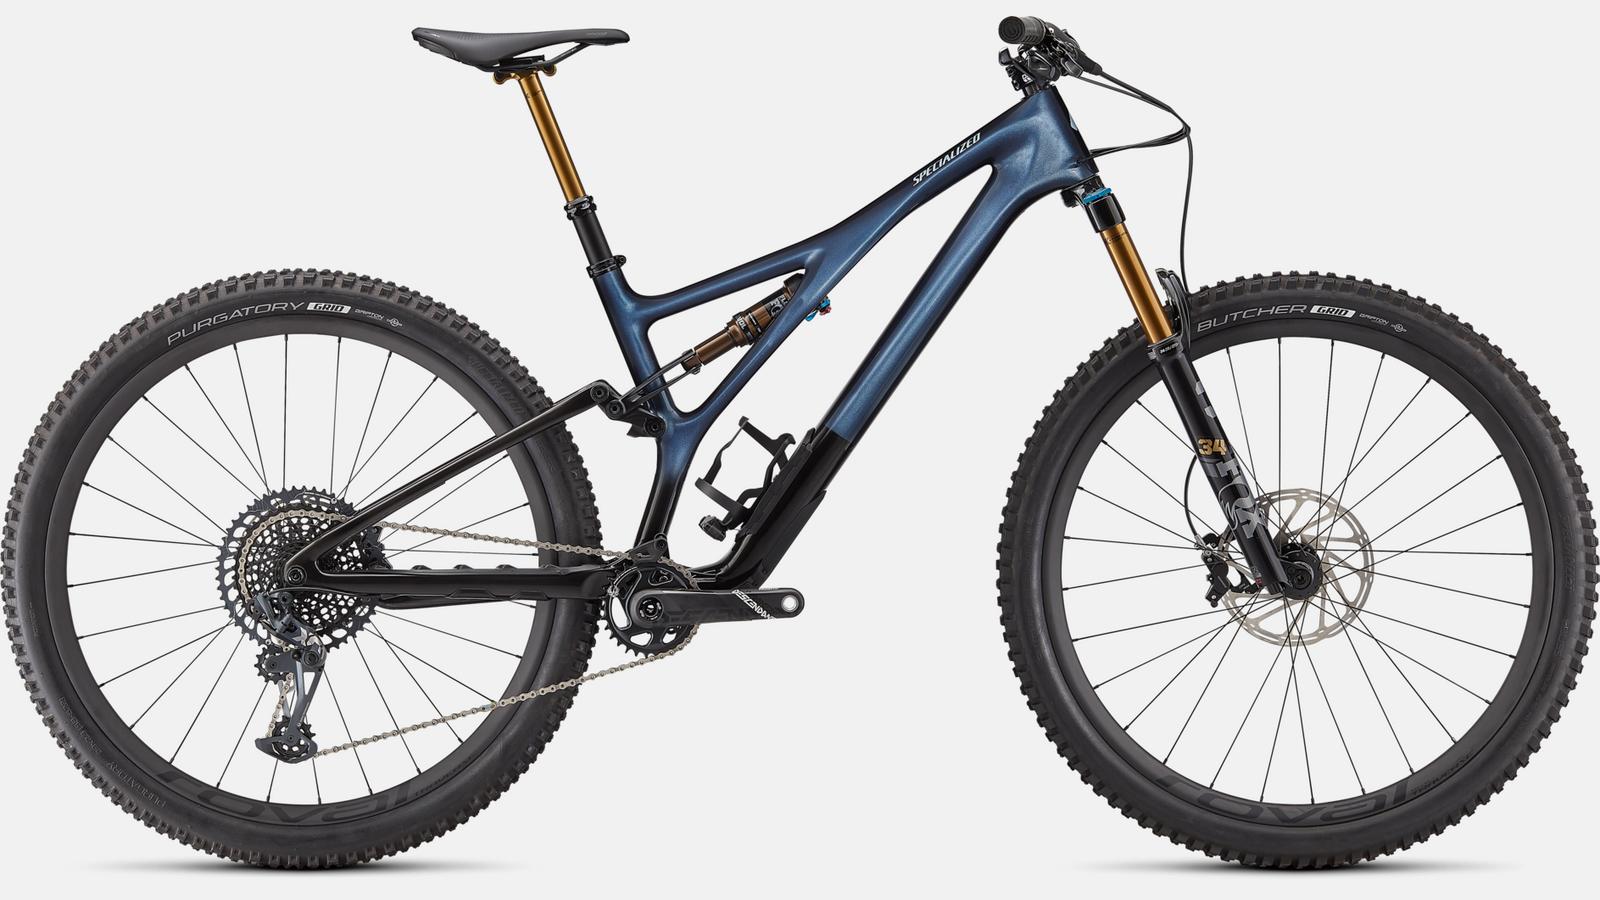 Touch-up paint for 2021 Specialized Stumpjumper Pro - Gloss Cast Blue Metallic